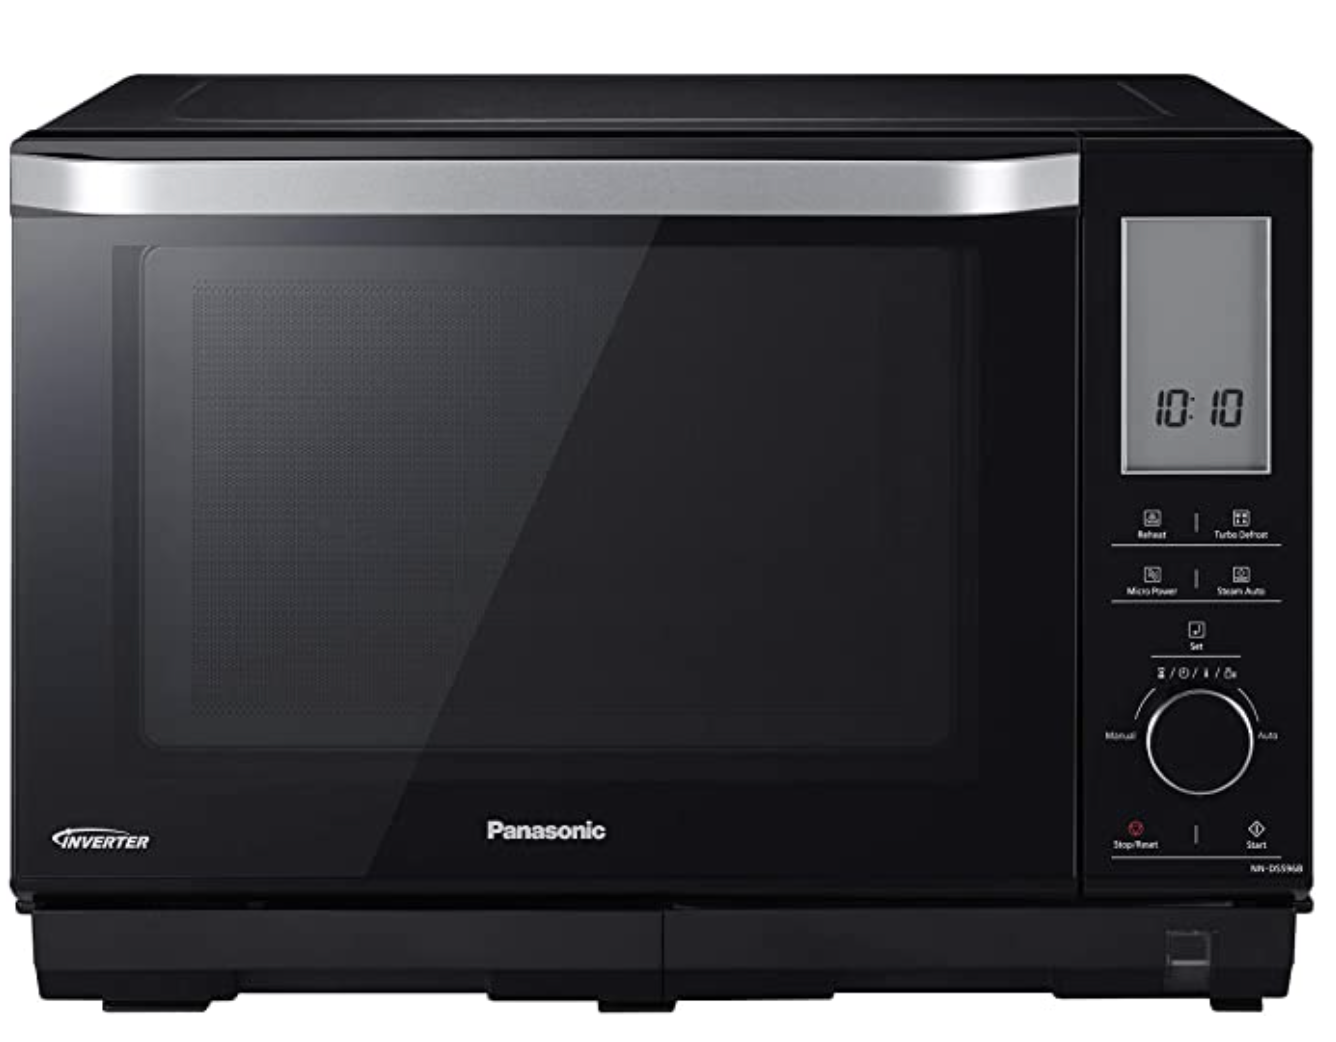 Screen Shot 2021 08 12 at 10.12.24 am Panasonic Customers Say Appliances Have Too Many Features